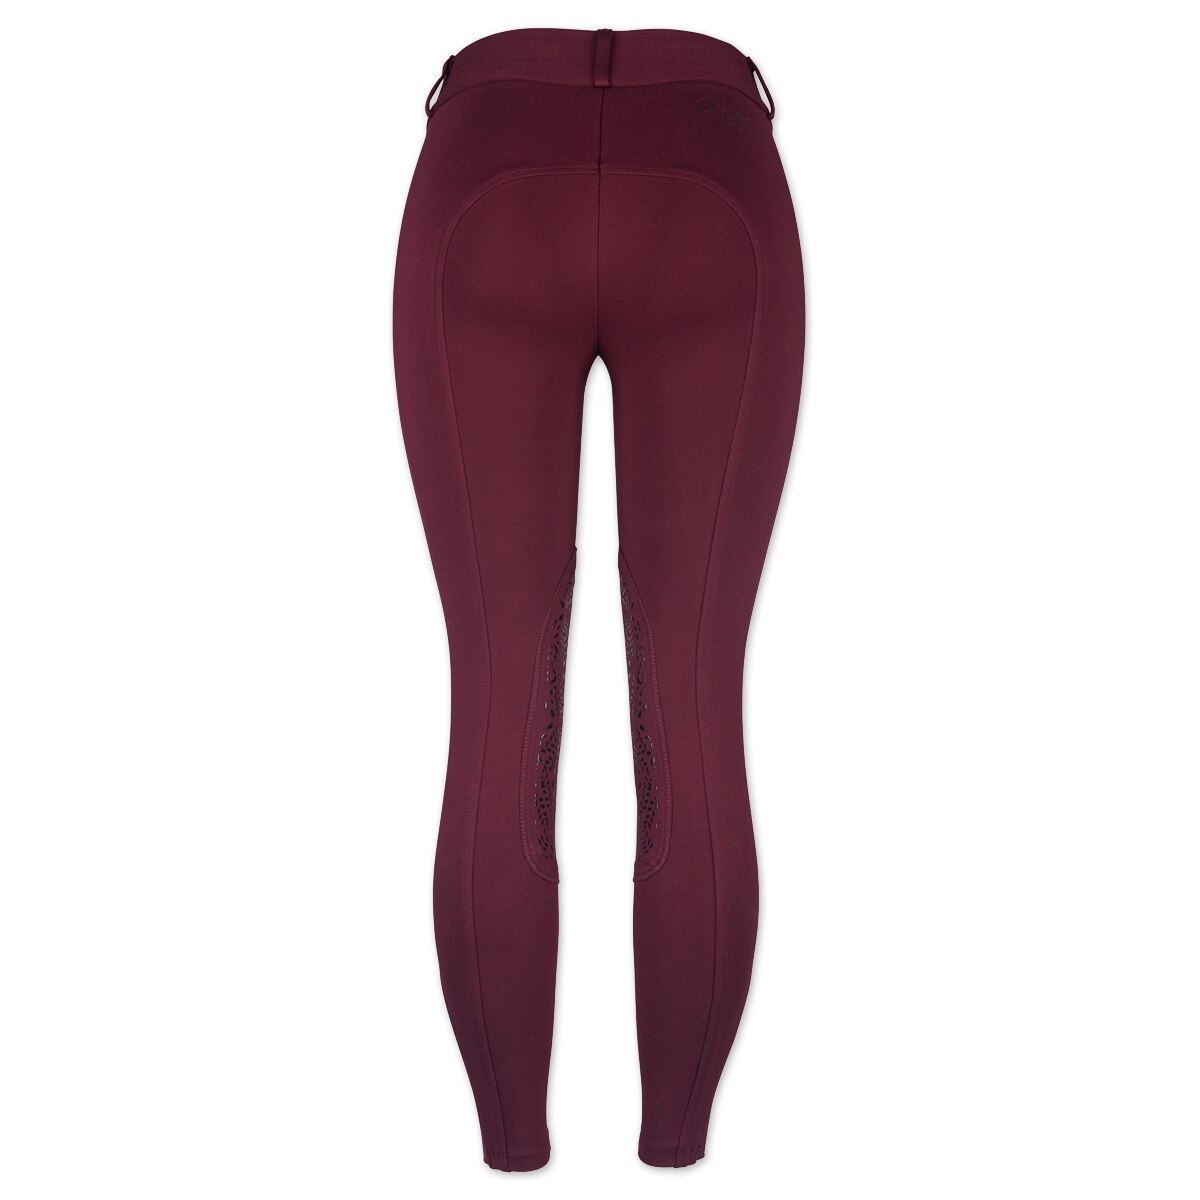 Piper Knit Breeches by SmartPak - Low Rise Knee Patch